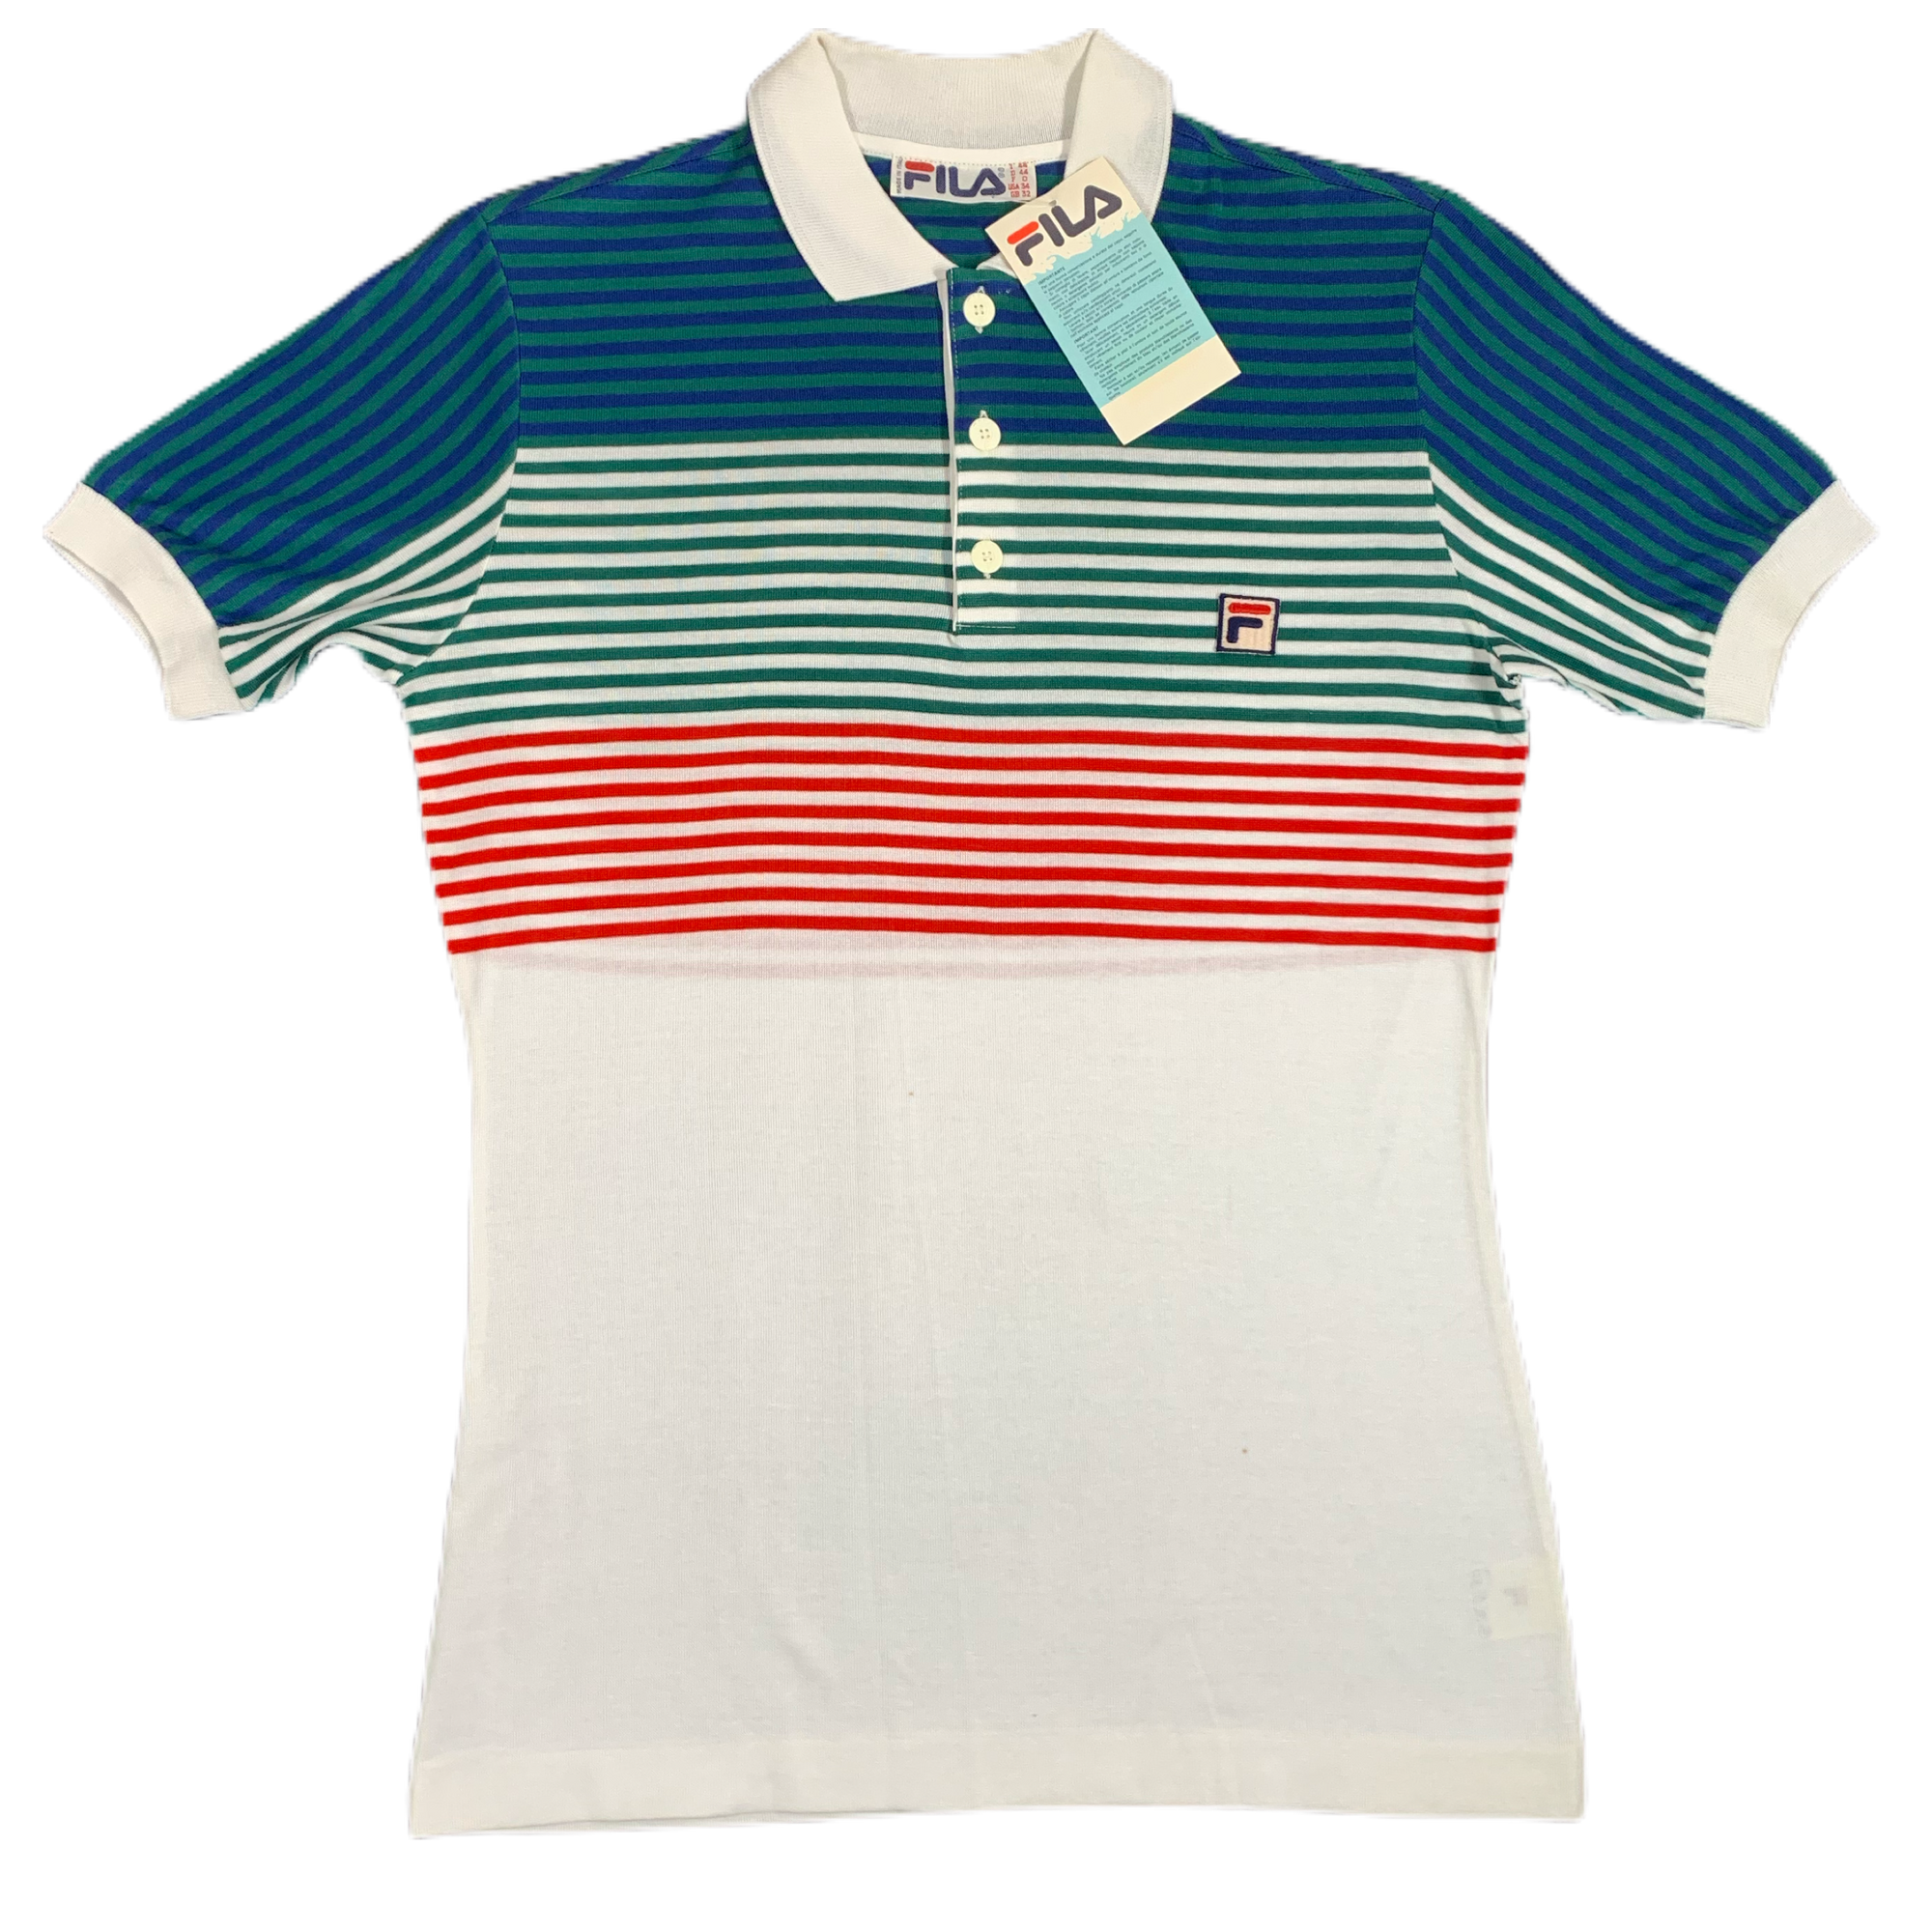 Vintage FILA Made In Italy "Striped" Casuals Tennis Shirt - jointcustodydc